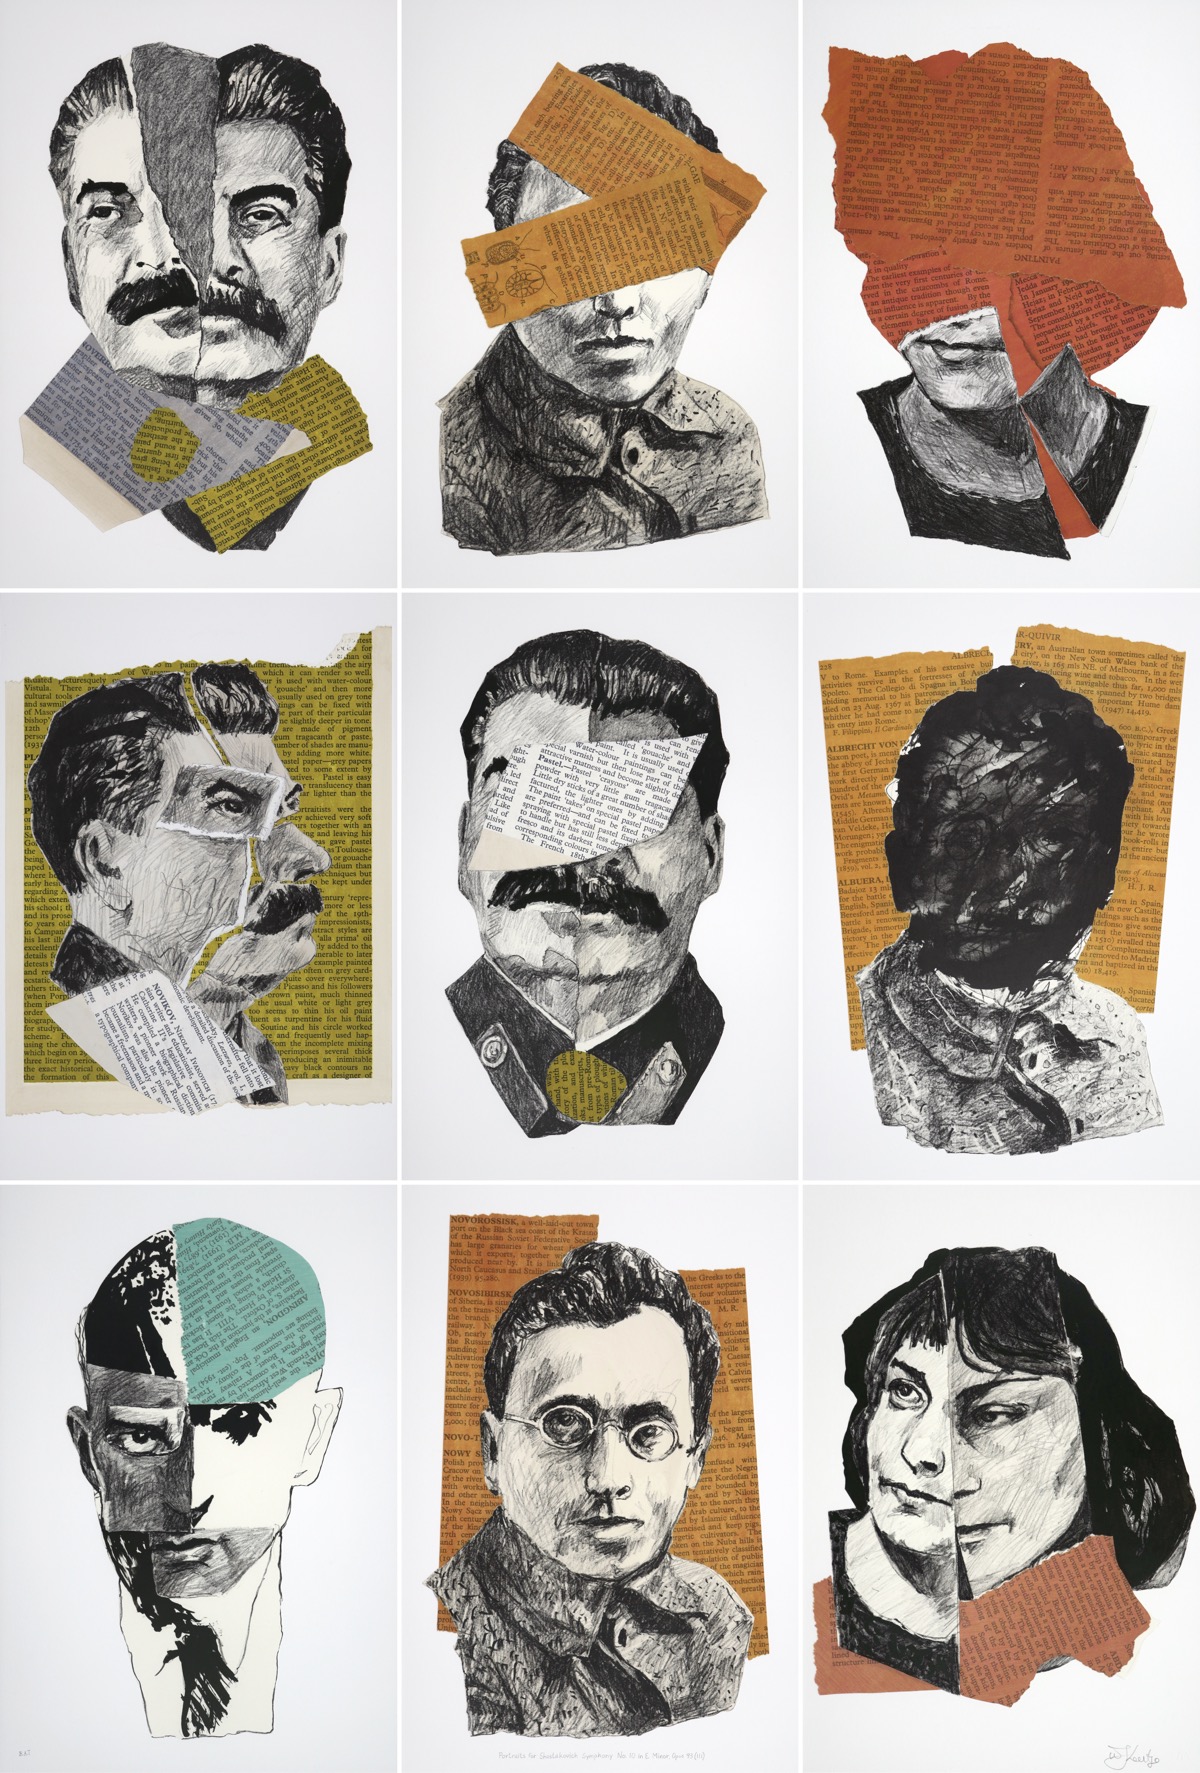 Limited edition print divided into nine sections with portraits of Elmira Nazirova, Mayakovsky and Stalin by William Kentridge